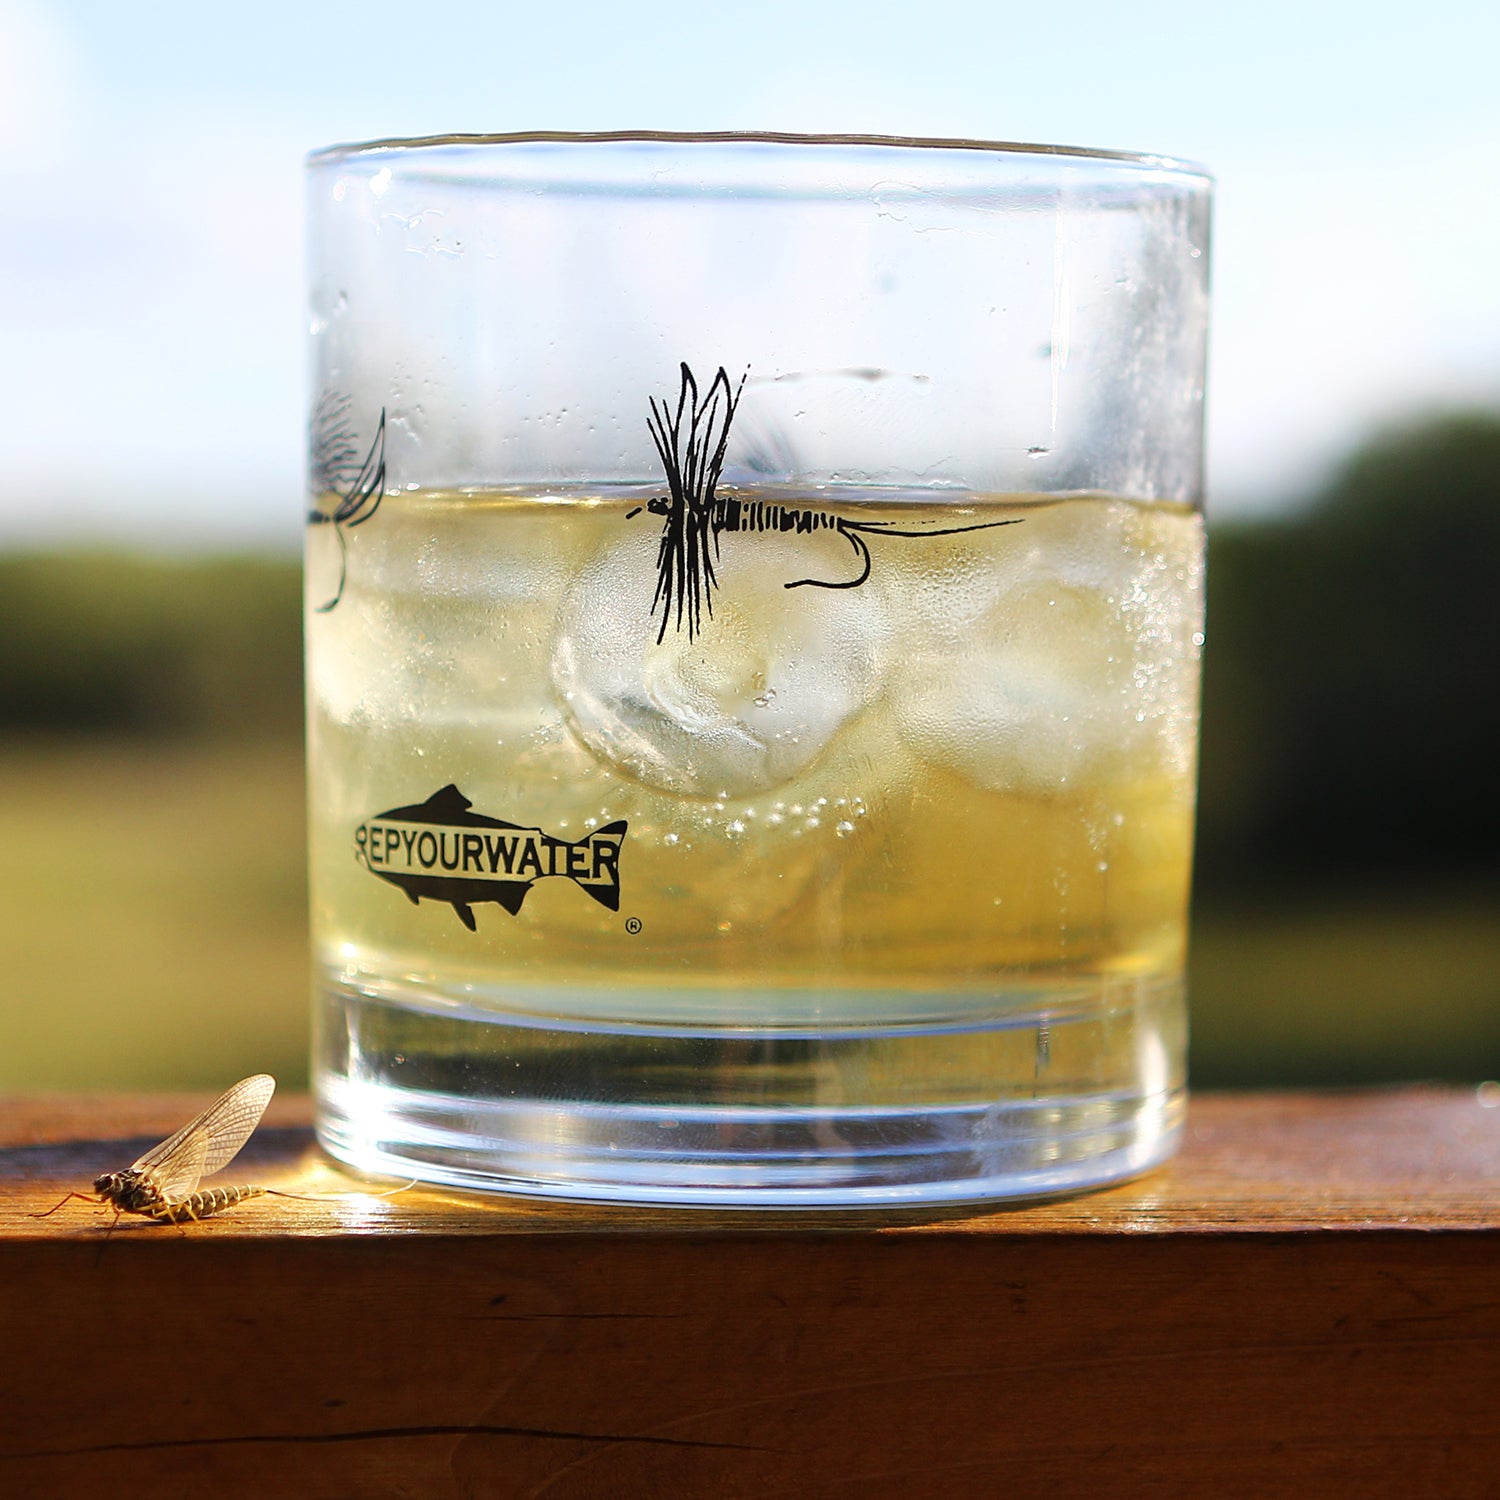 A low ball cocktail glass is on a wood railing.  The glass has brown liquid and ice in it and has a printed dry fly on it with a logo that reads repyourwater inside a trout silhouette. A real mayfly is next to the glass